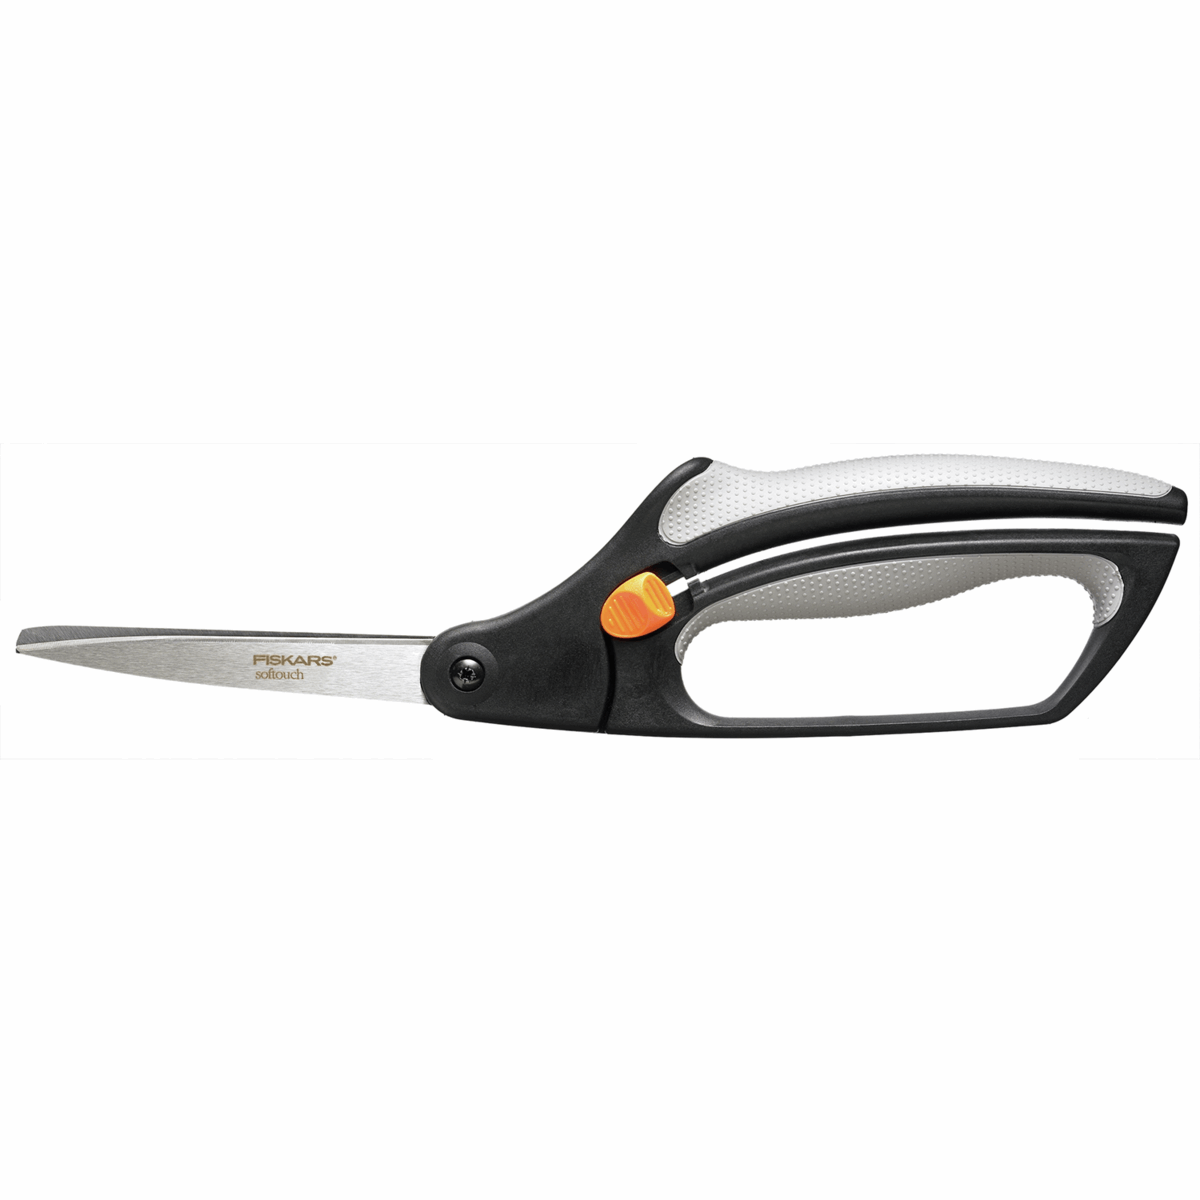 Fiskars Softouch Professional 26cm/10.23in